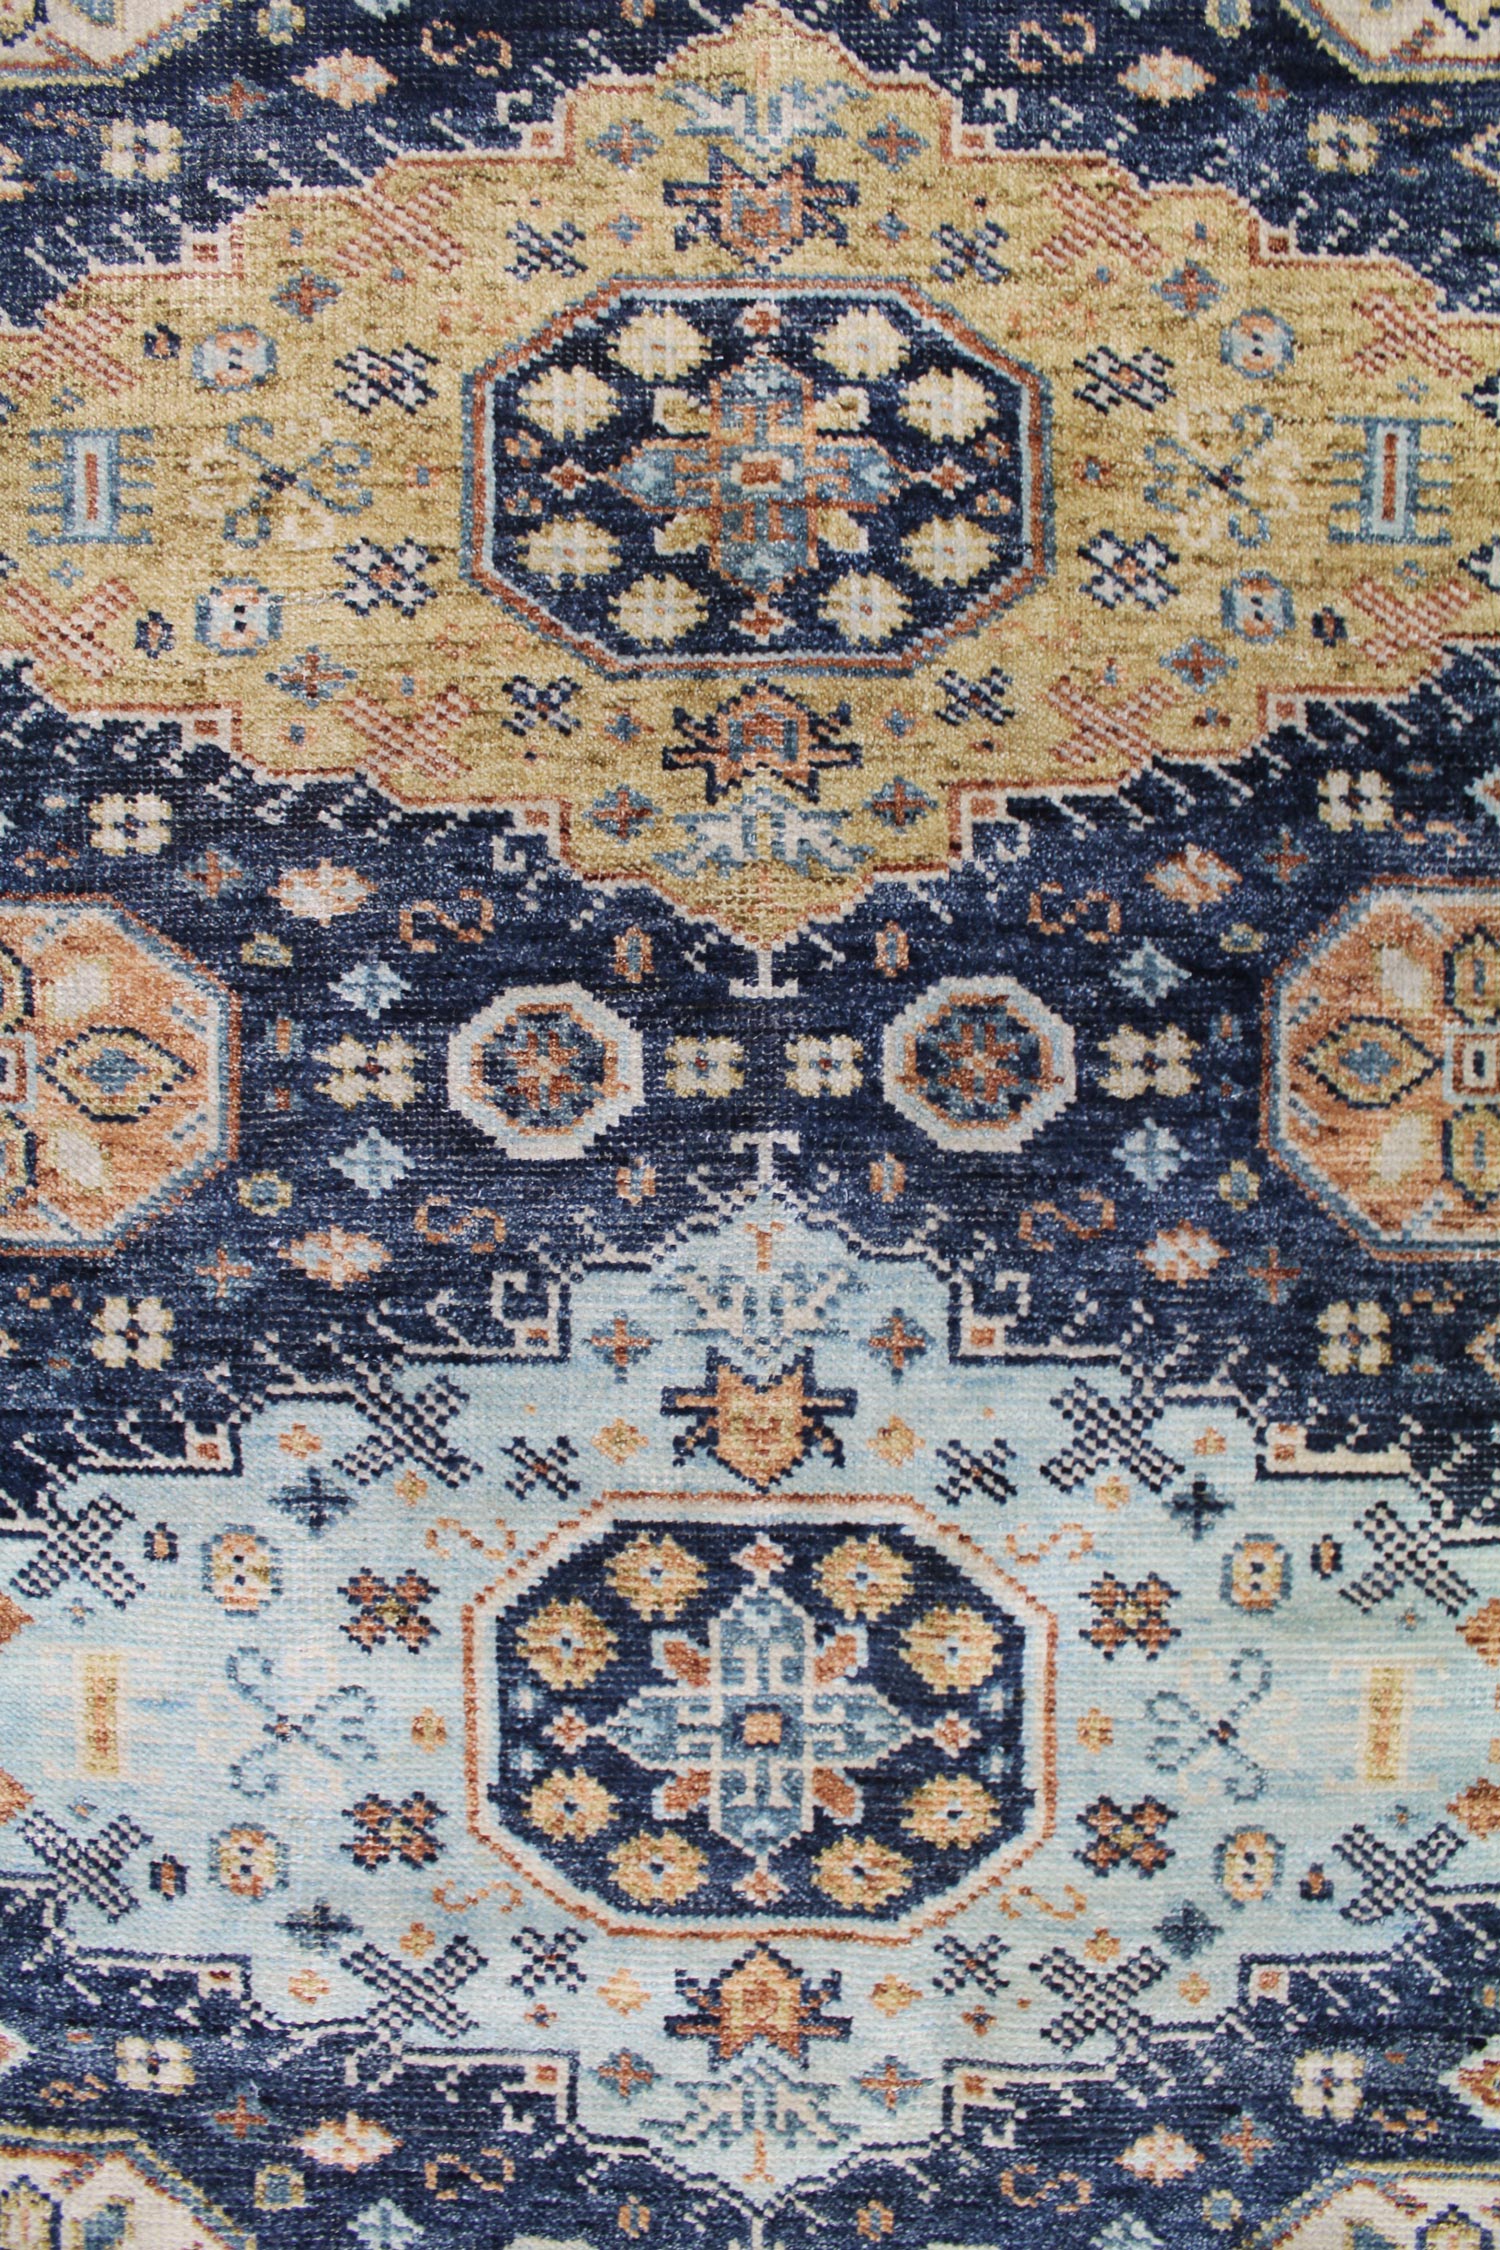 Vecce Handwoven Transitional Rug, J62762